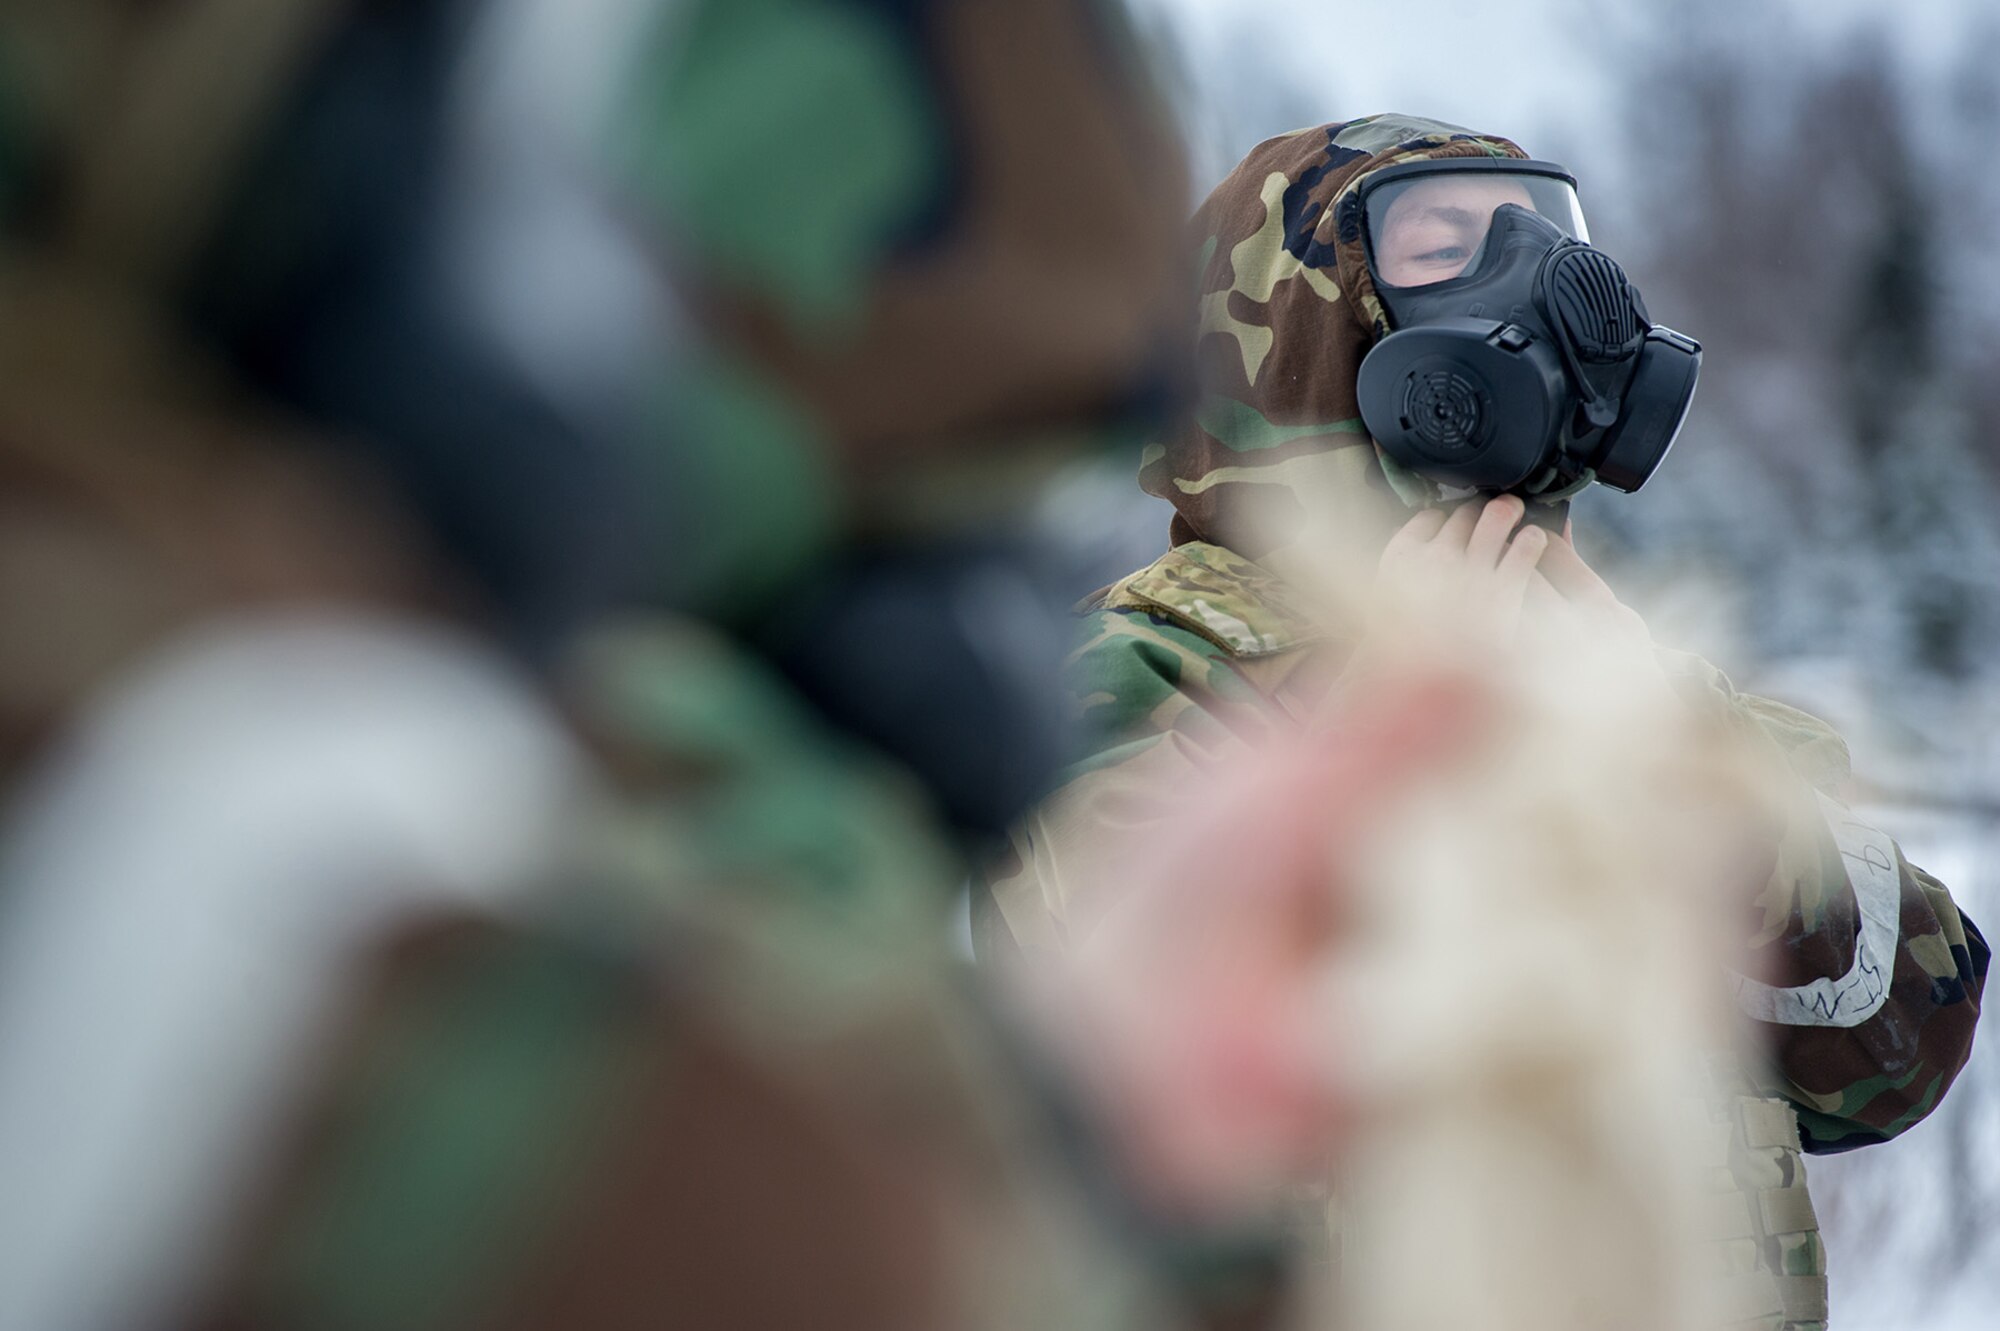 An Airman assigned to the 673d Civil Engineer Squadron, Explosives Ordinance Disposal Flight, adjusts the hood around his protective mask before a live-fire demolitions exercise in Mission Oriented Protective Posture 4 on Joint Base Elmendorf-Richardson, Alaska, Feb.14, 2018.  The Airmen were conducting EOD training in a simulated chemical weapons contaminated environment.